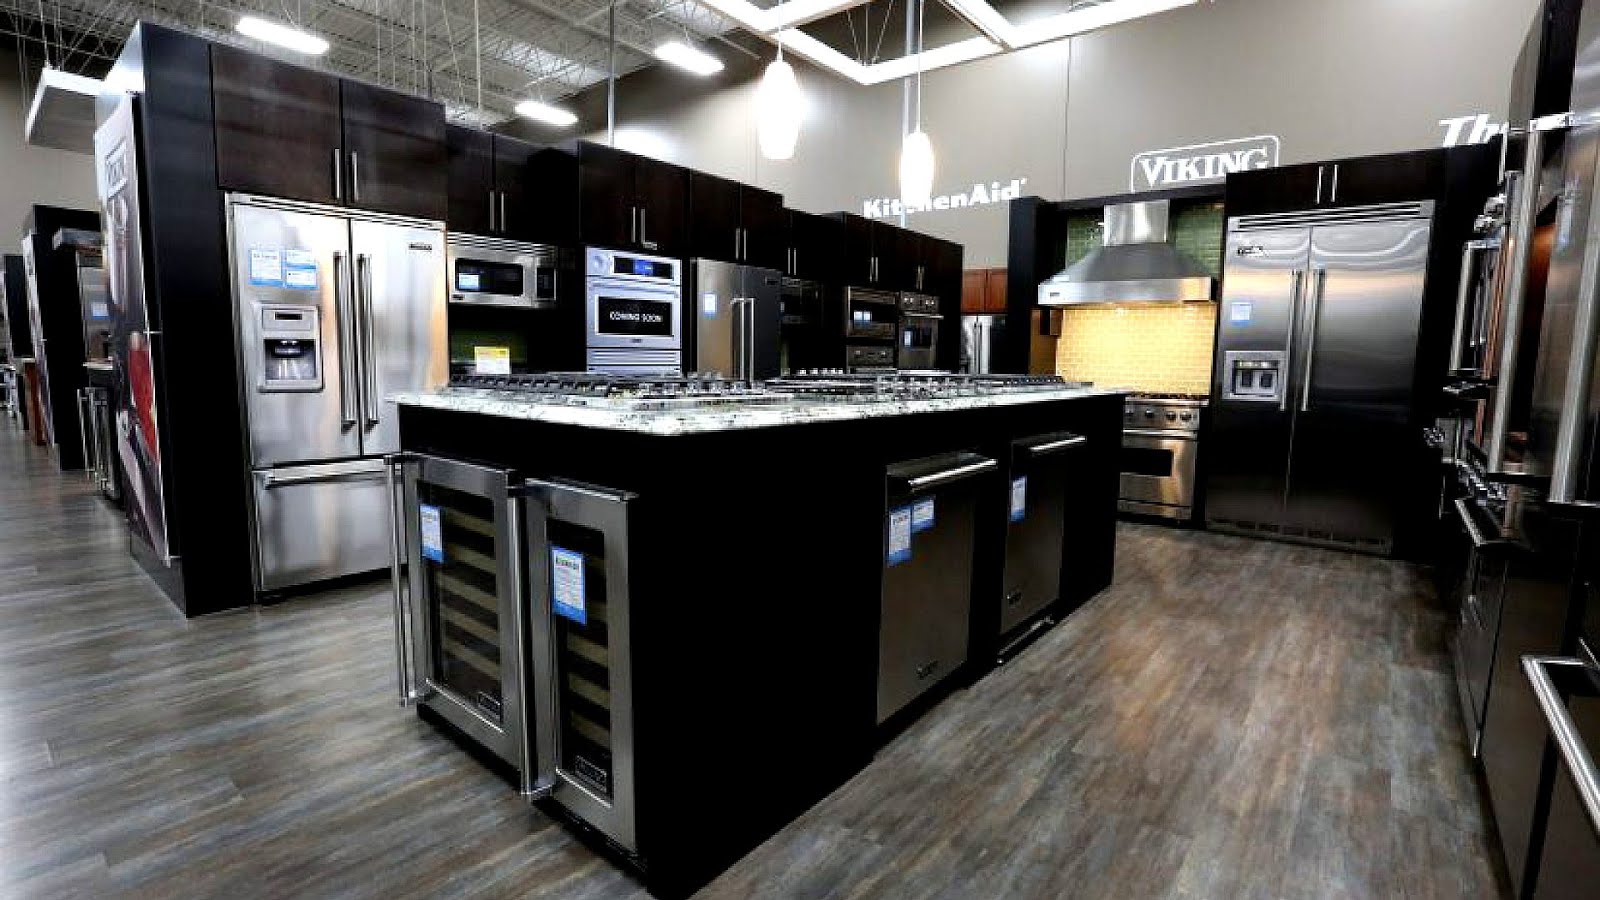 Top Rated Kitchen Appliance Brands Brand Choices